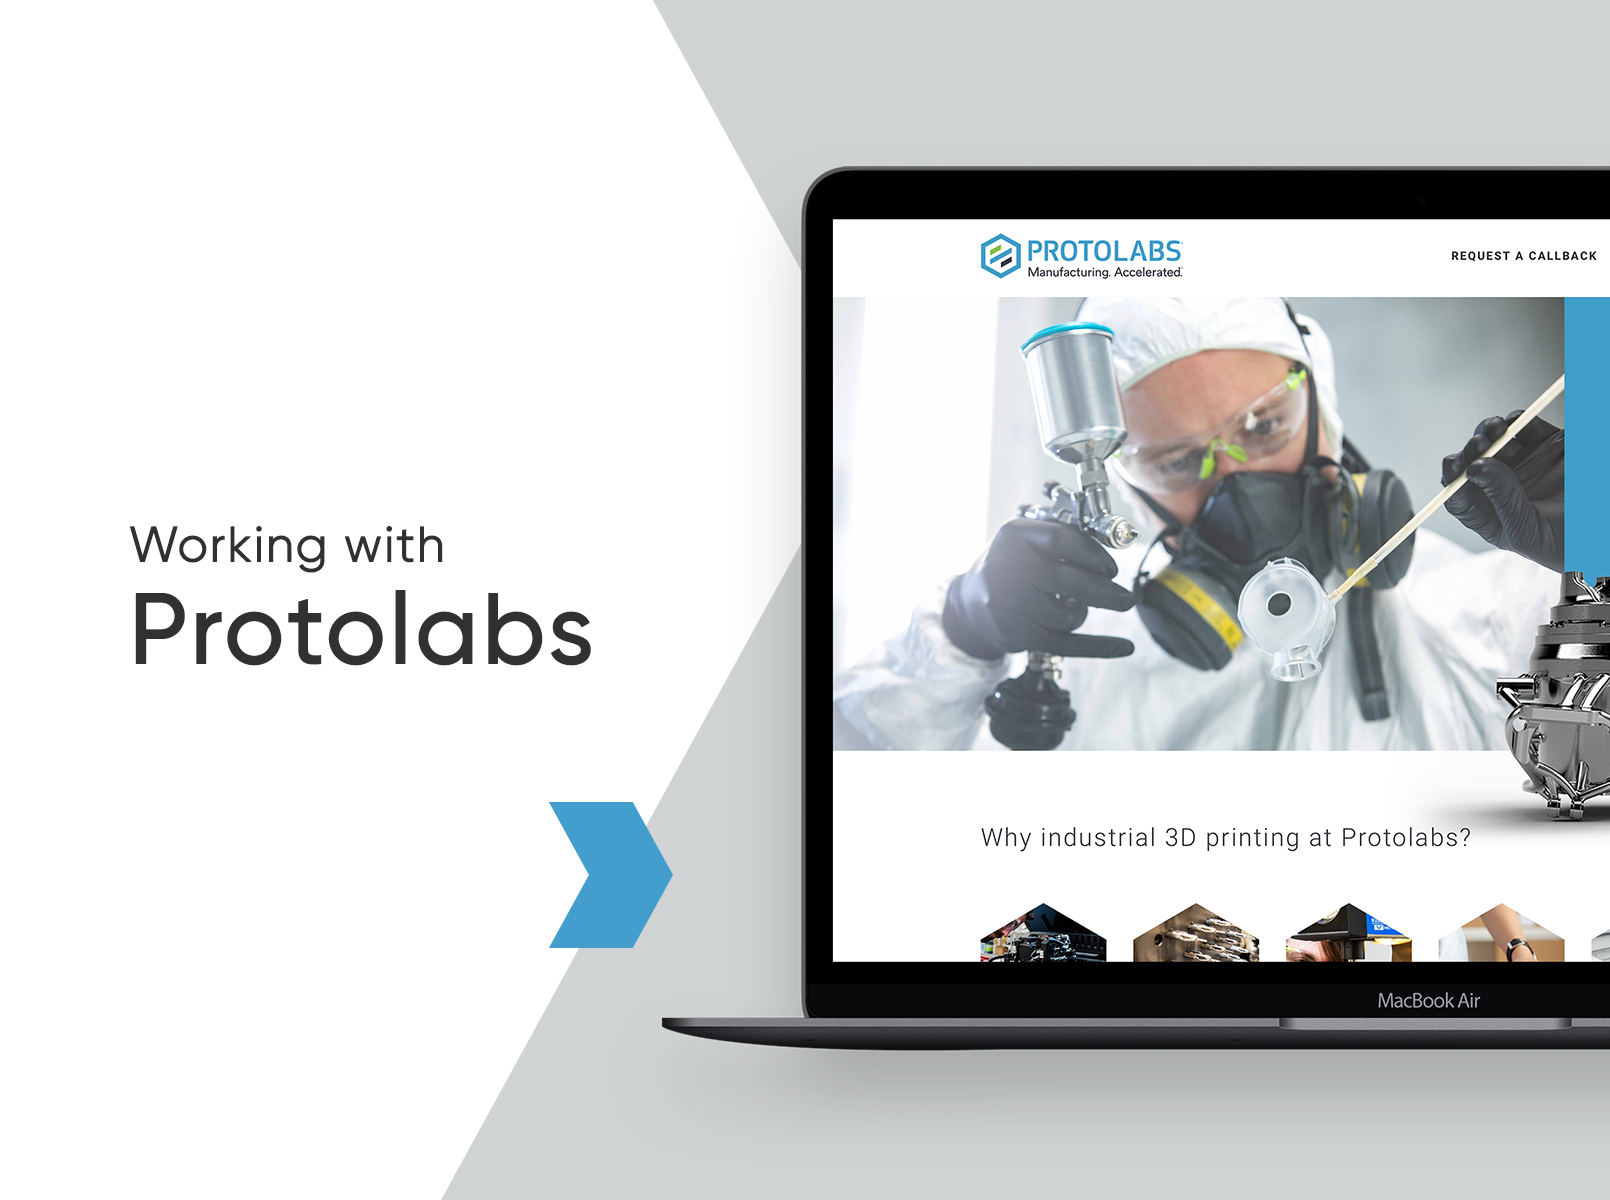 We’re proud to work alongside Protolabs